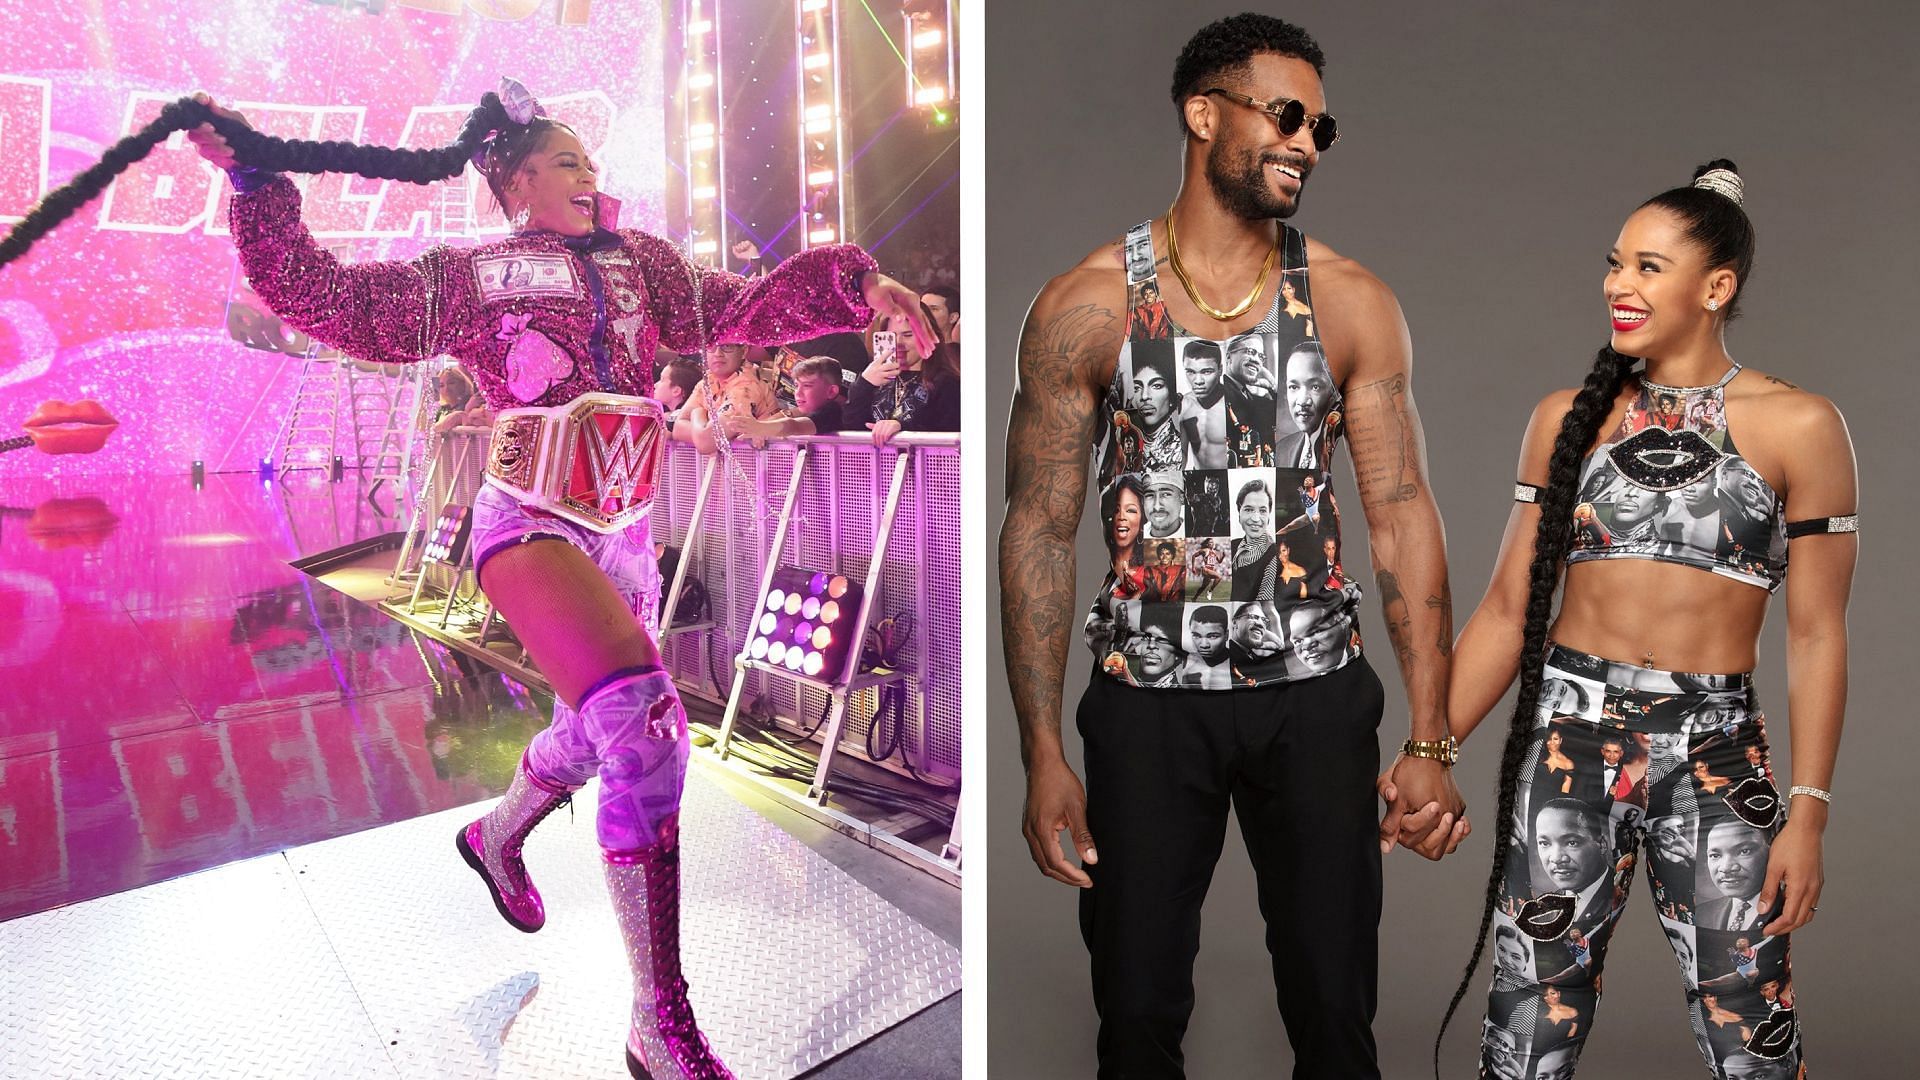 Bianca Belair and Montez Ford are a power couple in WWE